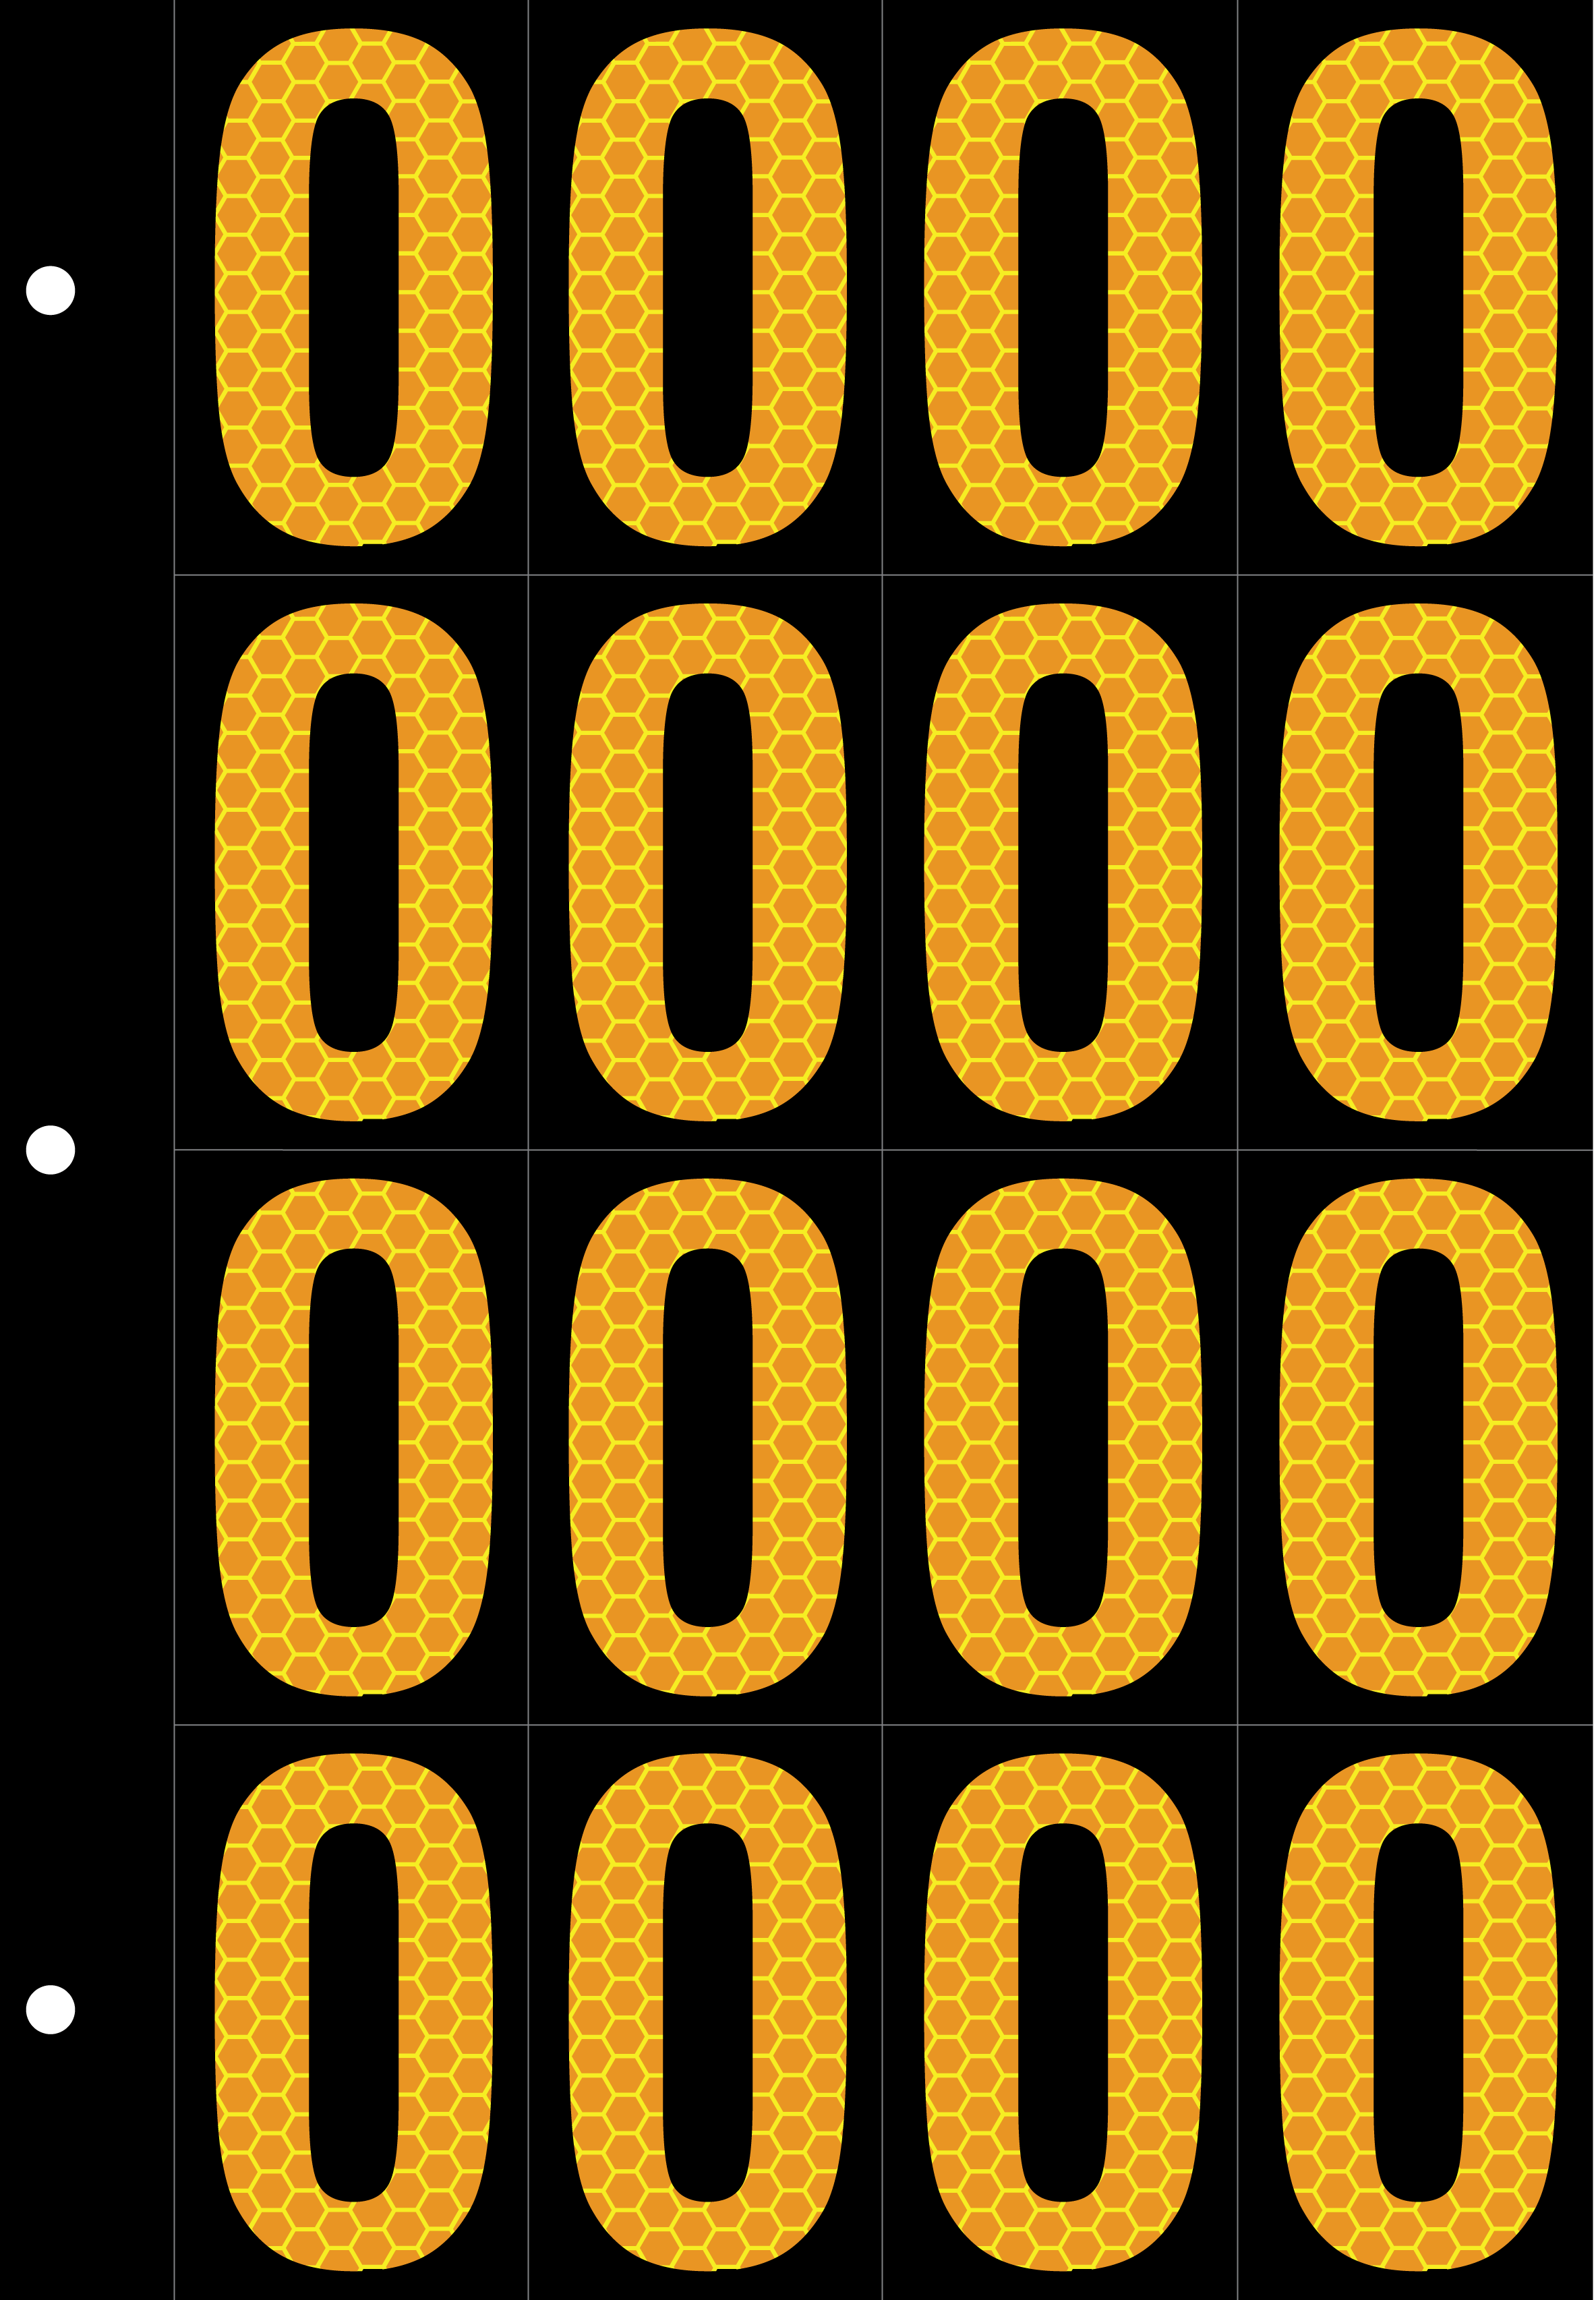 An image of a sheet of 16 retroreflective high intensity prismatic numbers & letters sized to fit in a 3-ring binder. Charaters are orange on a black background. The legend is, "0".